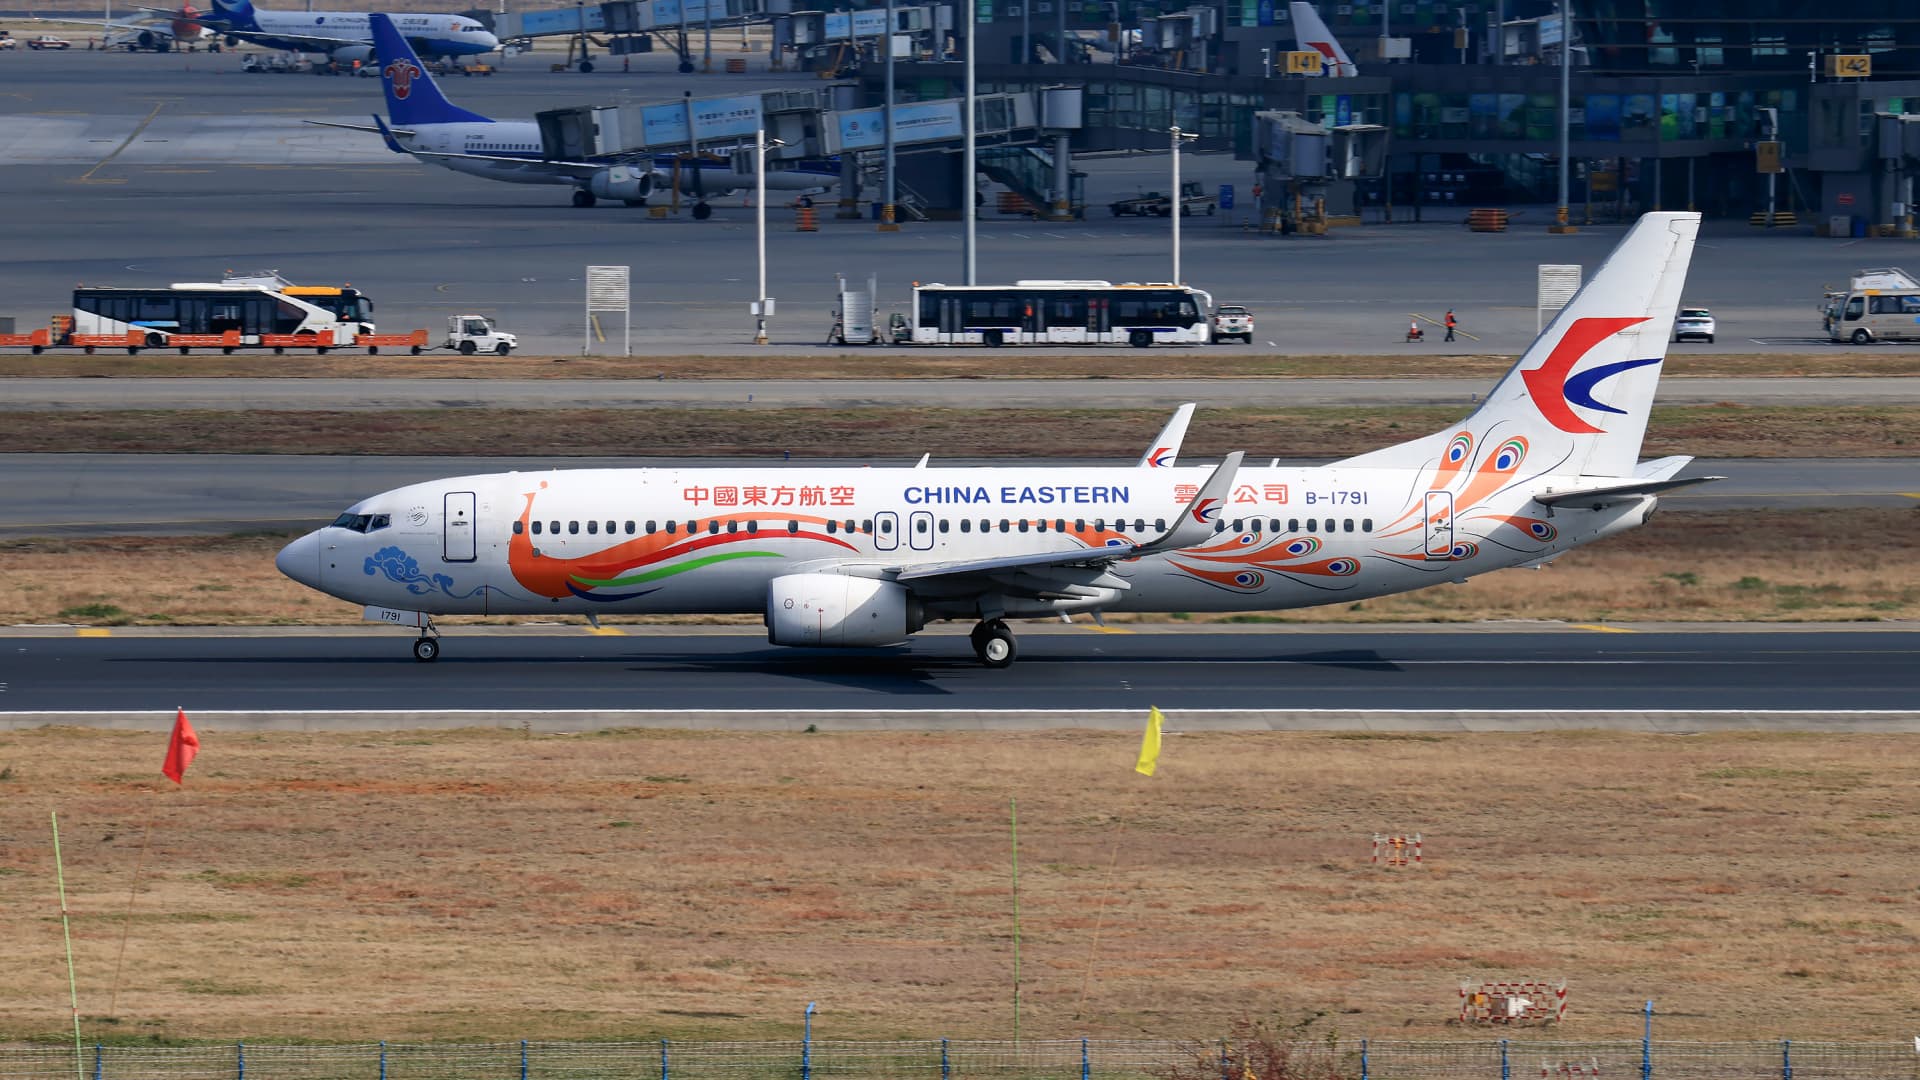 A China Eastern Airlines Boeing 737-800 aircraft flies on February 13, 2022 in Kunming, Yunnan Province of China.